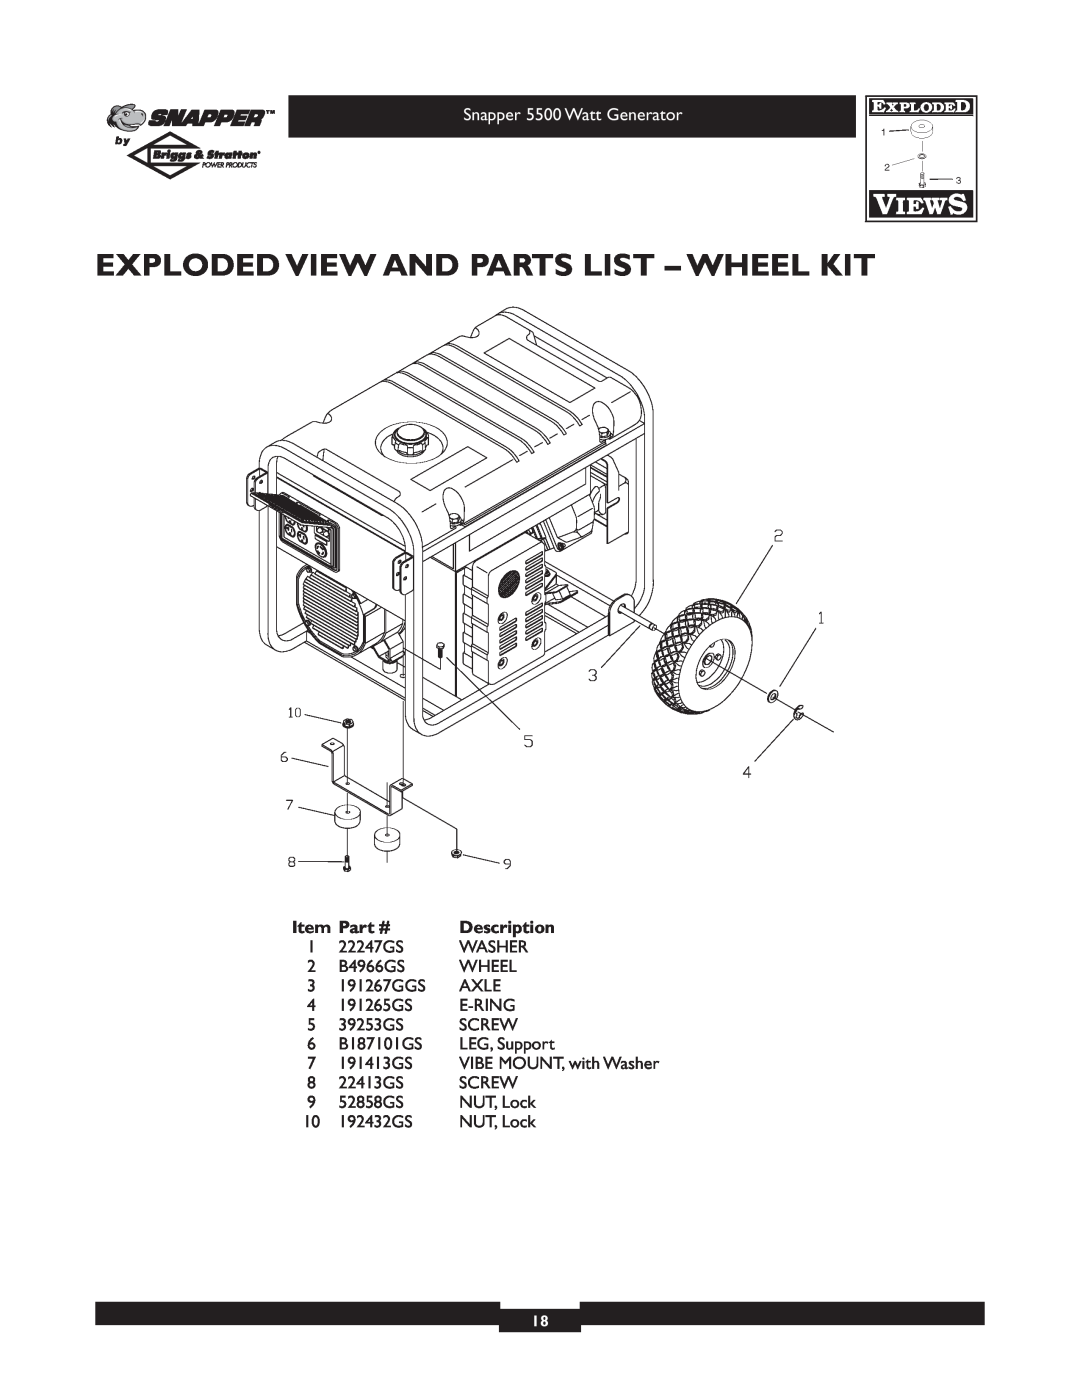 Snapper 1668-0 owner manual Exploded View And Parts List - Wheel Kit, Snapper 5500 Watt Generator, VIBE MOUNT, with Washer 